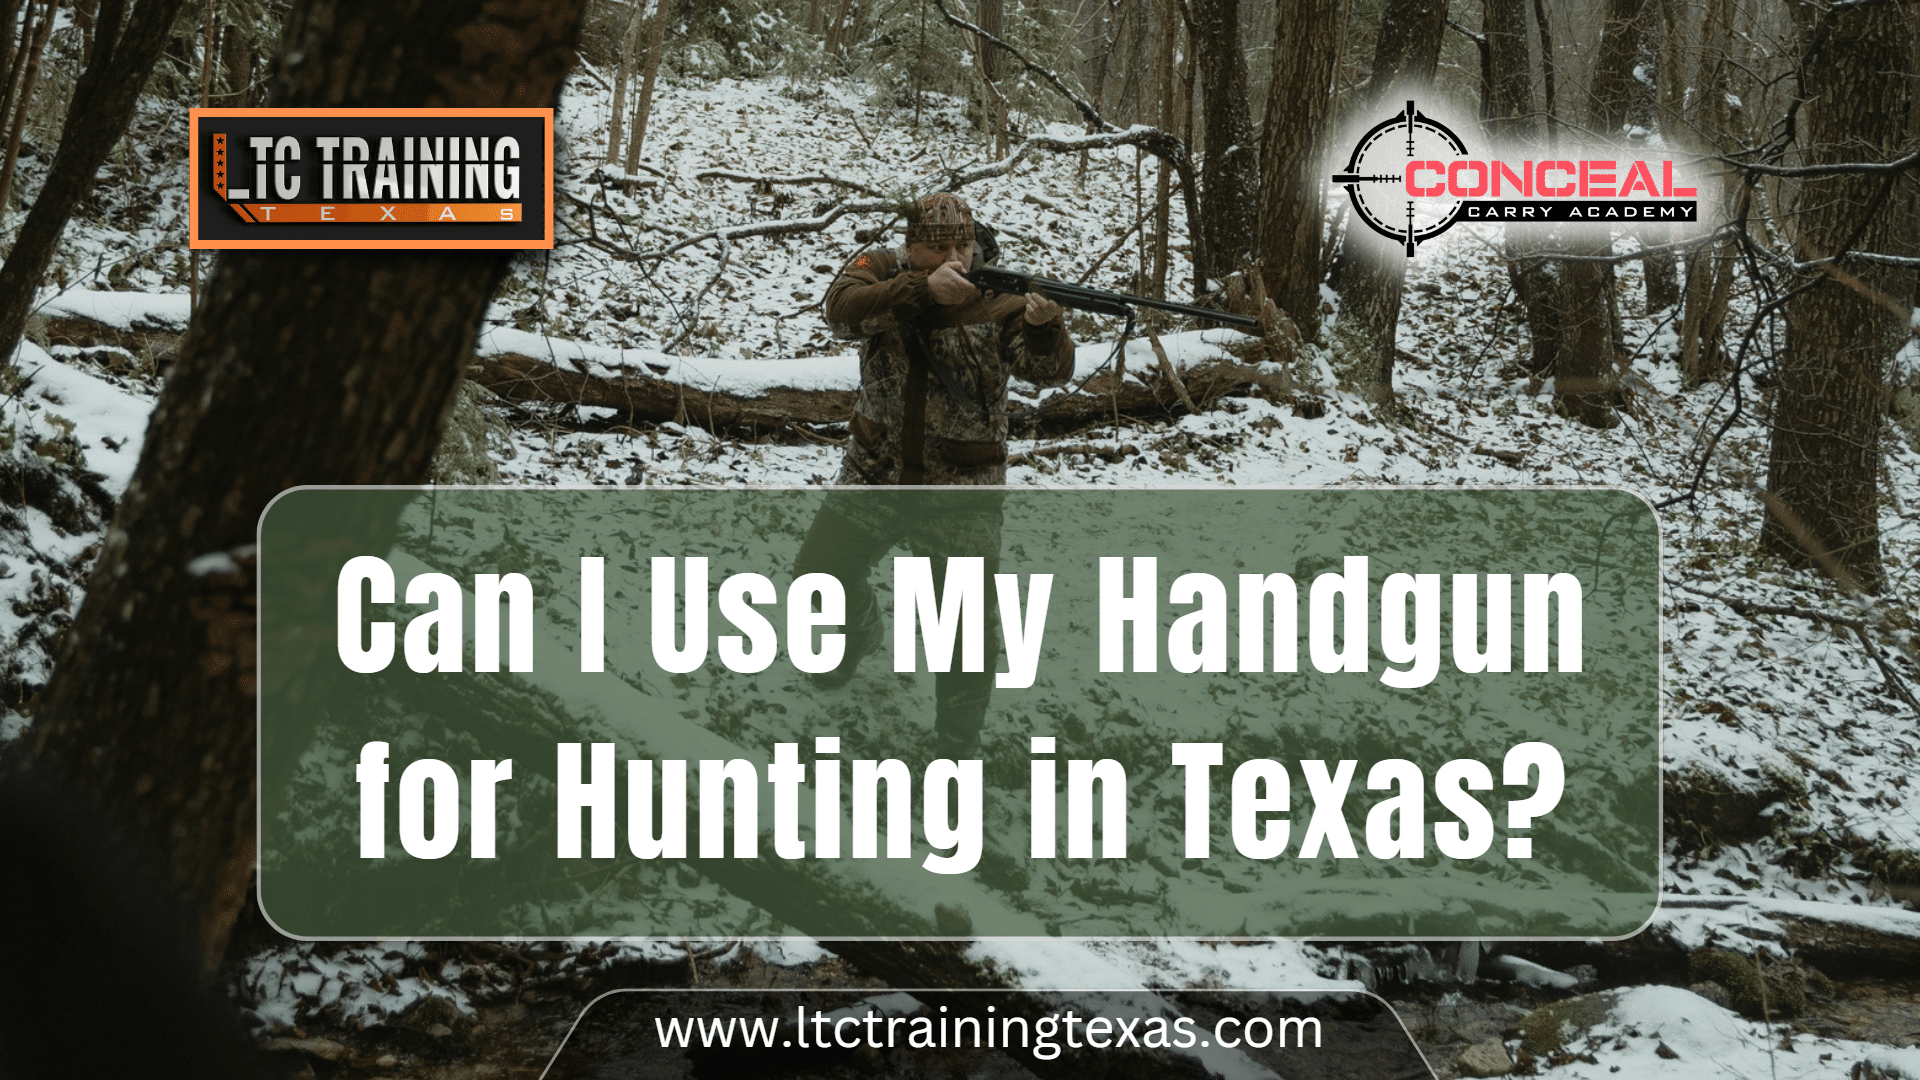 Can I Use My Handgun for Hunting in Texas?